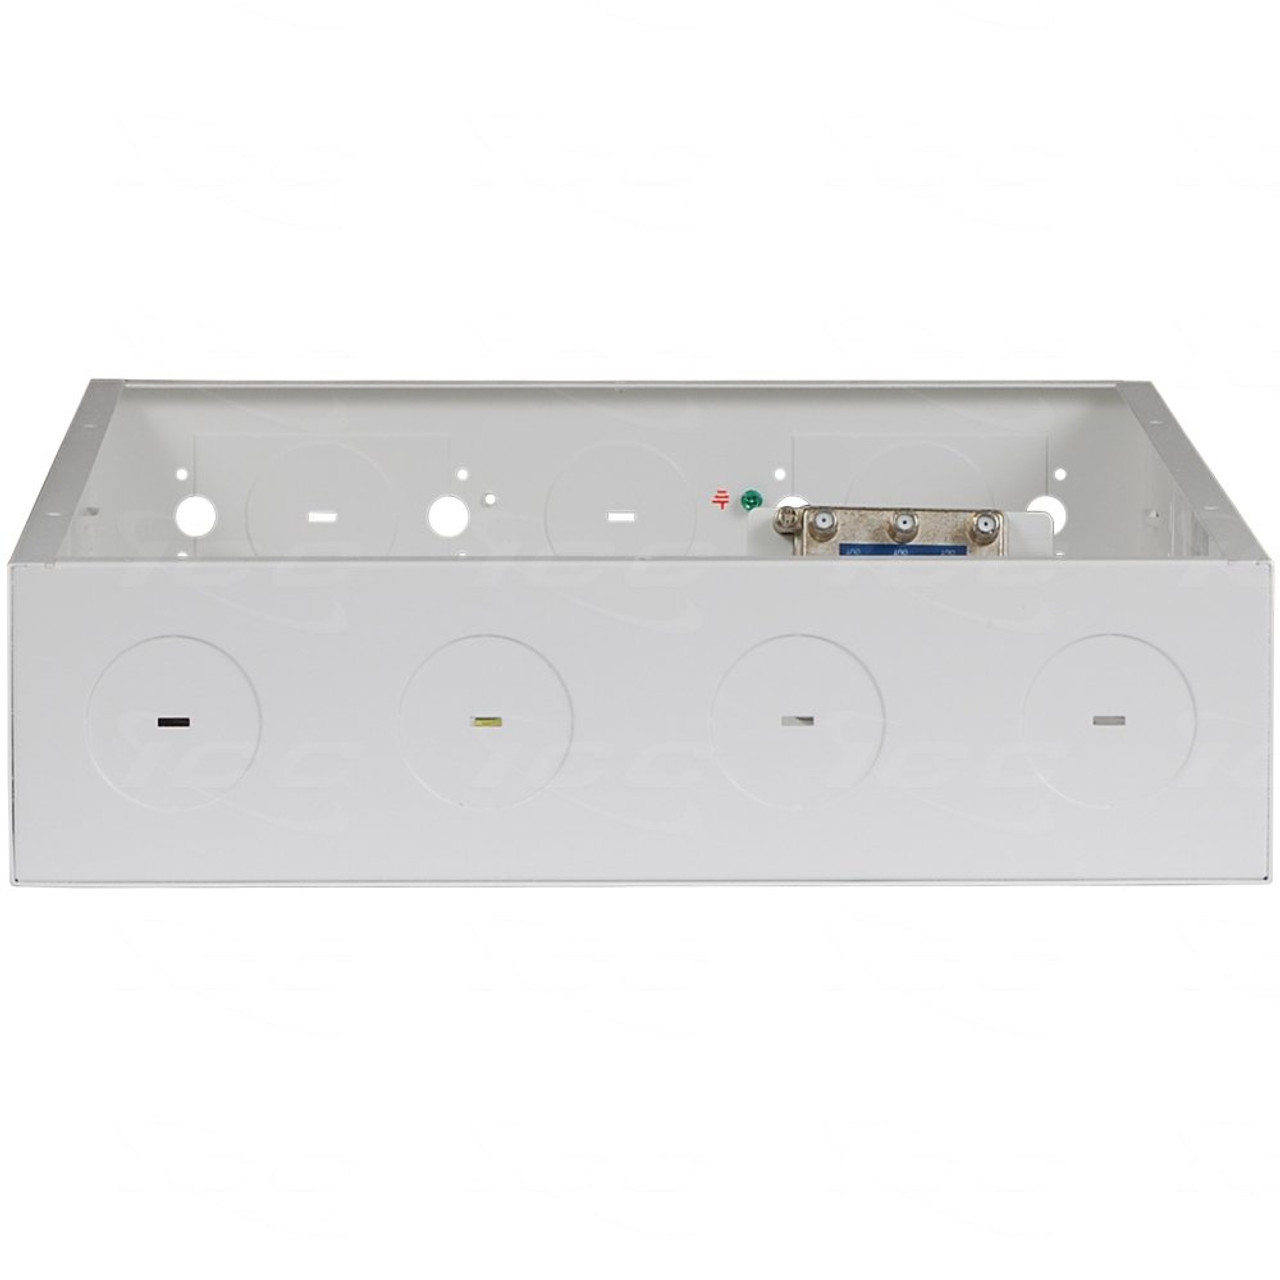 ICC 21” Metal Structured Wiring Enclosure, Media Enclosure with Voice, Data, and Video Modules with Door, Recessed Wall Box for Distribution of Networking Services, White